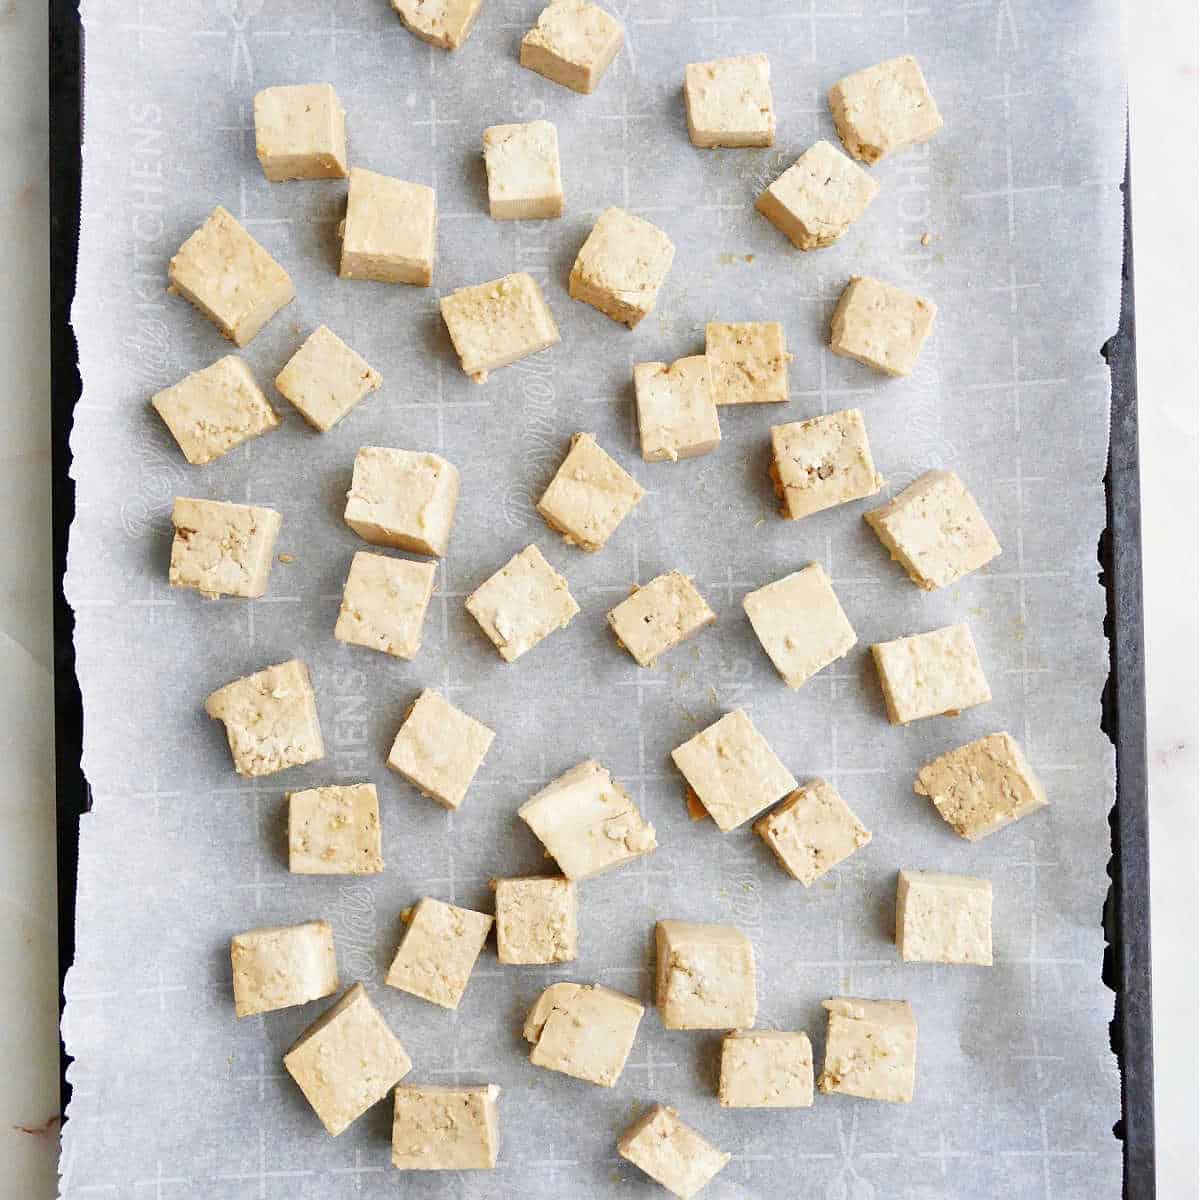 marinated tofu cubes on a baking sheet before going in the oven